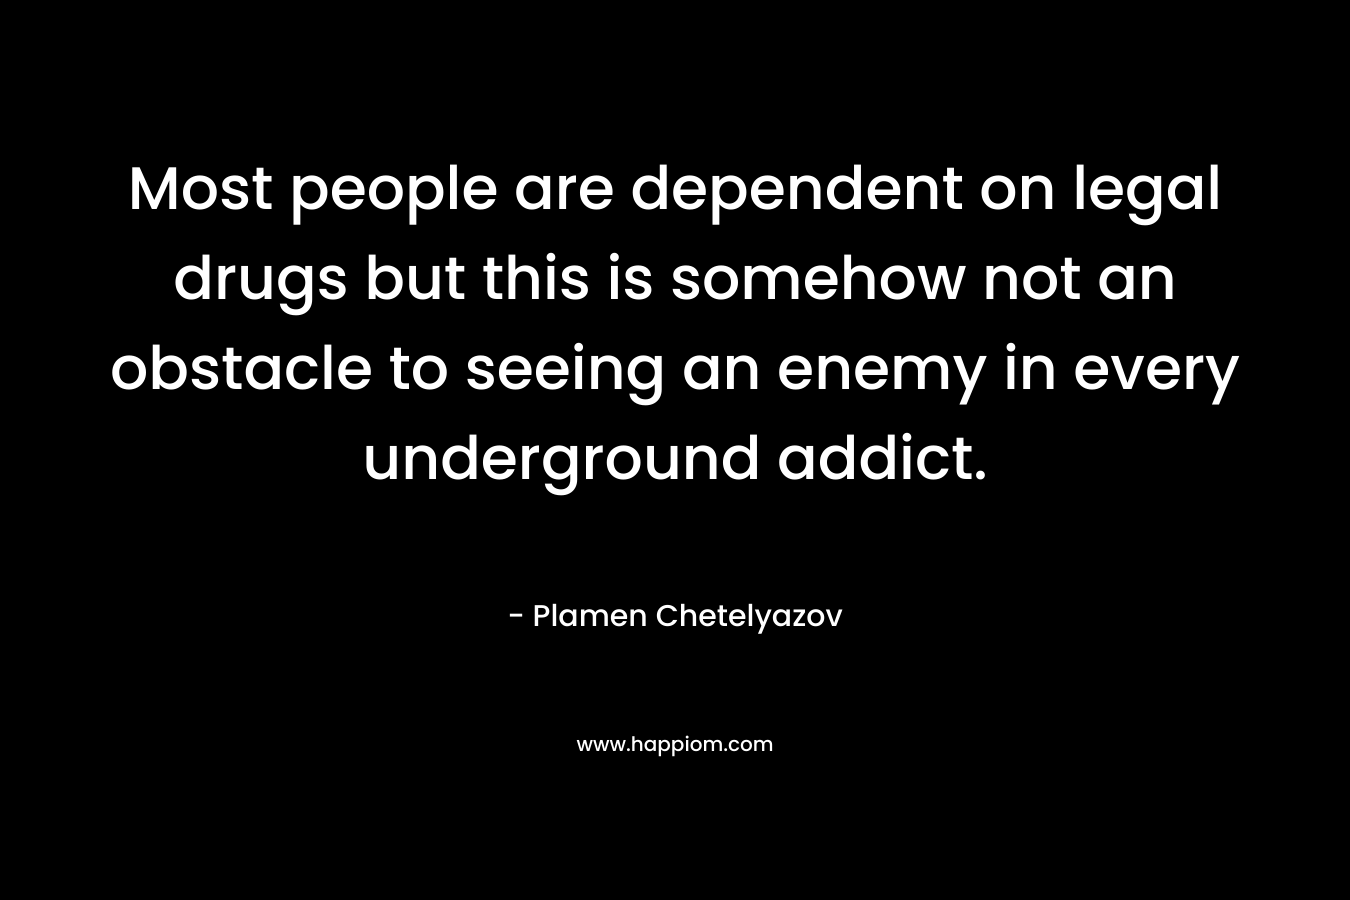 Most people are dependent on legal drugs but this is somehow not an obstacle to seeing an enemy in every underground addict. – Plamen Chetelyazov